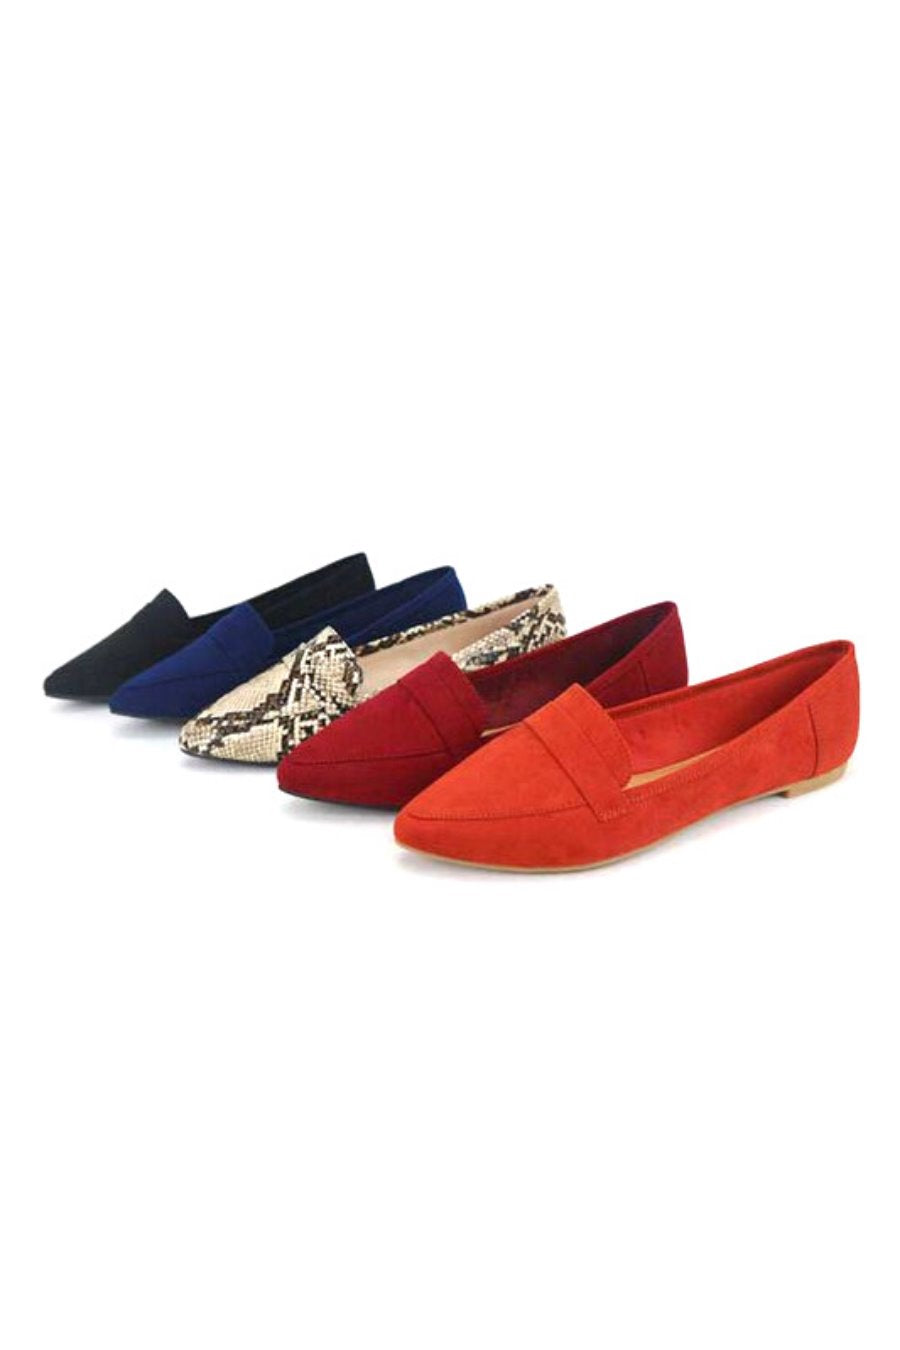 Darby Pointed Toe Flats - Jess Lea Boutique